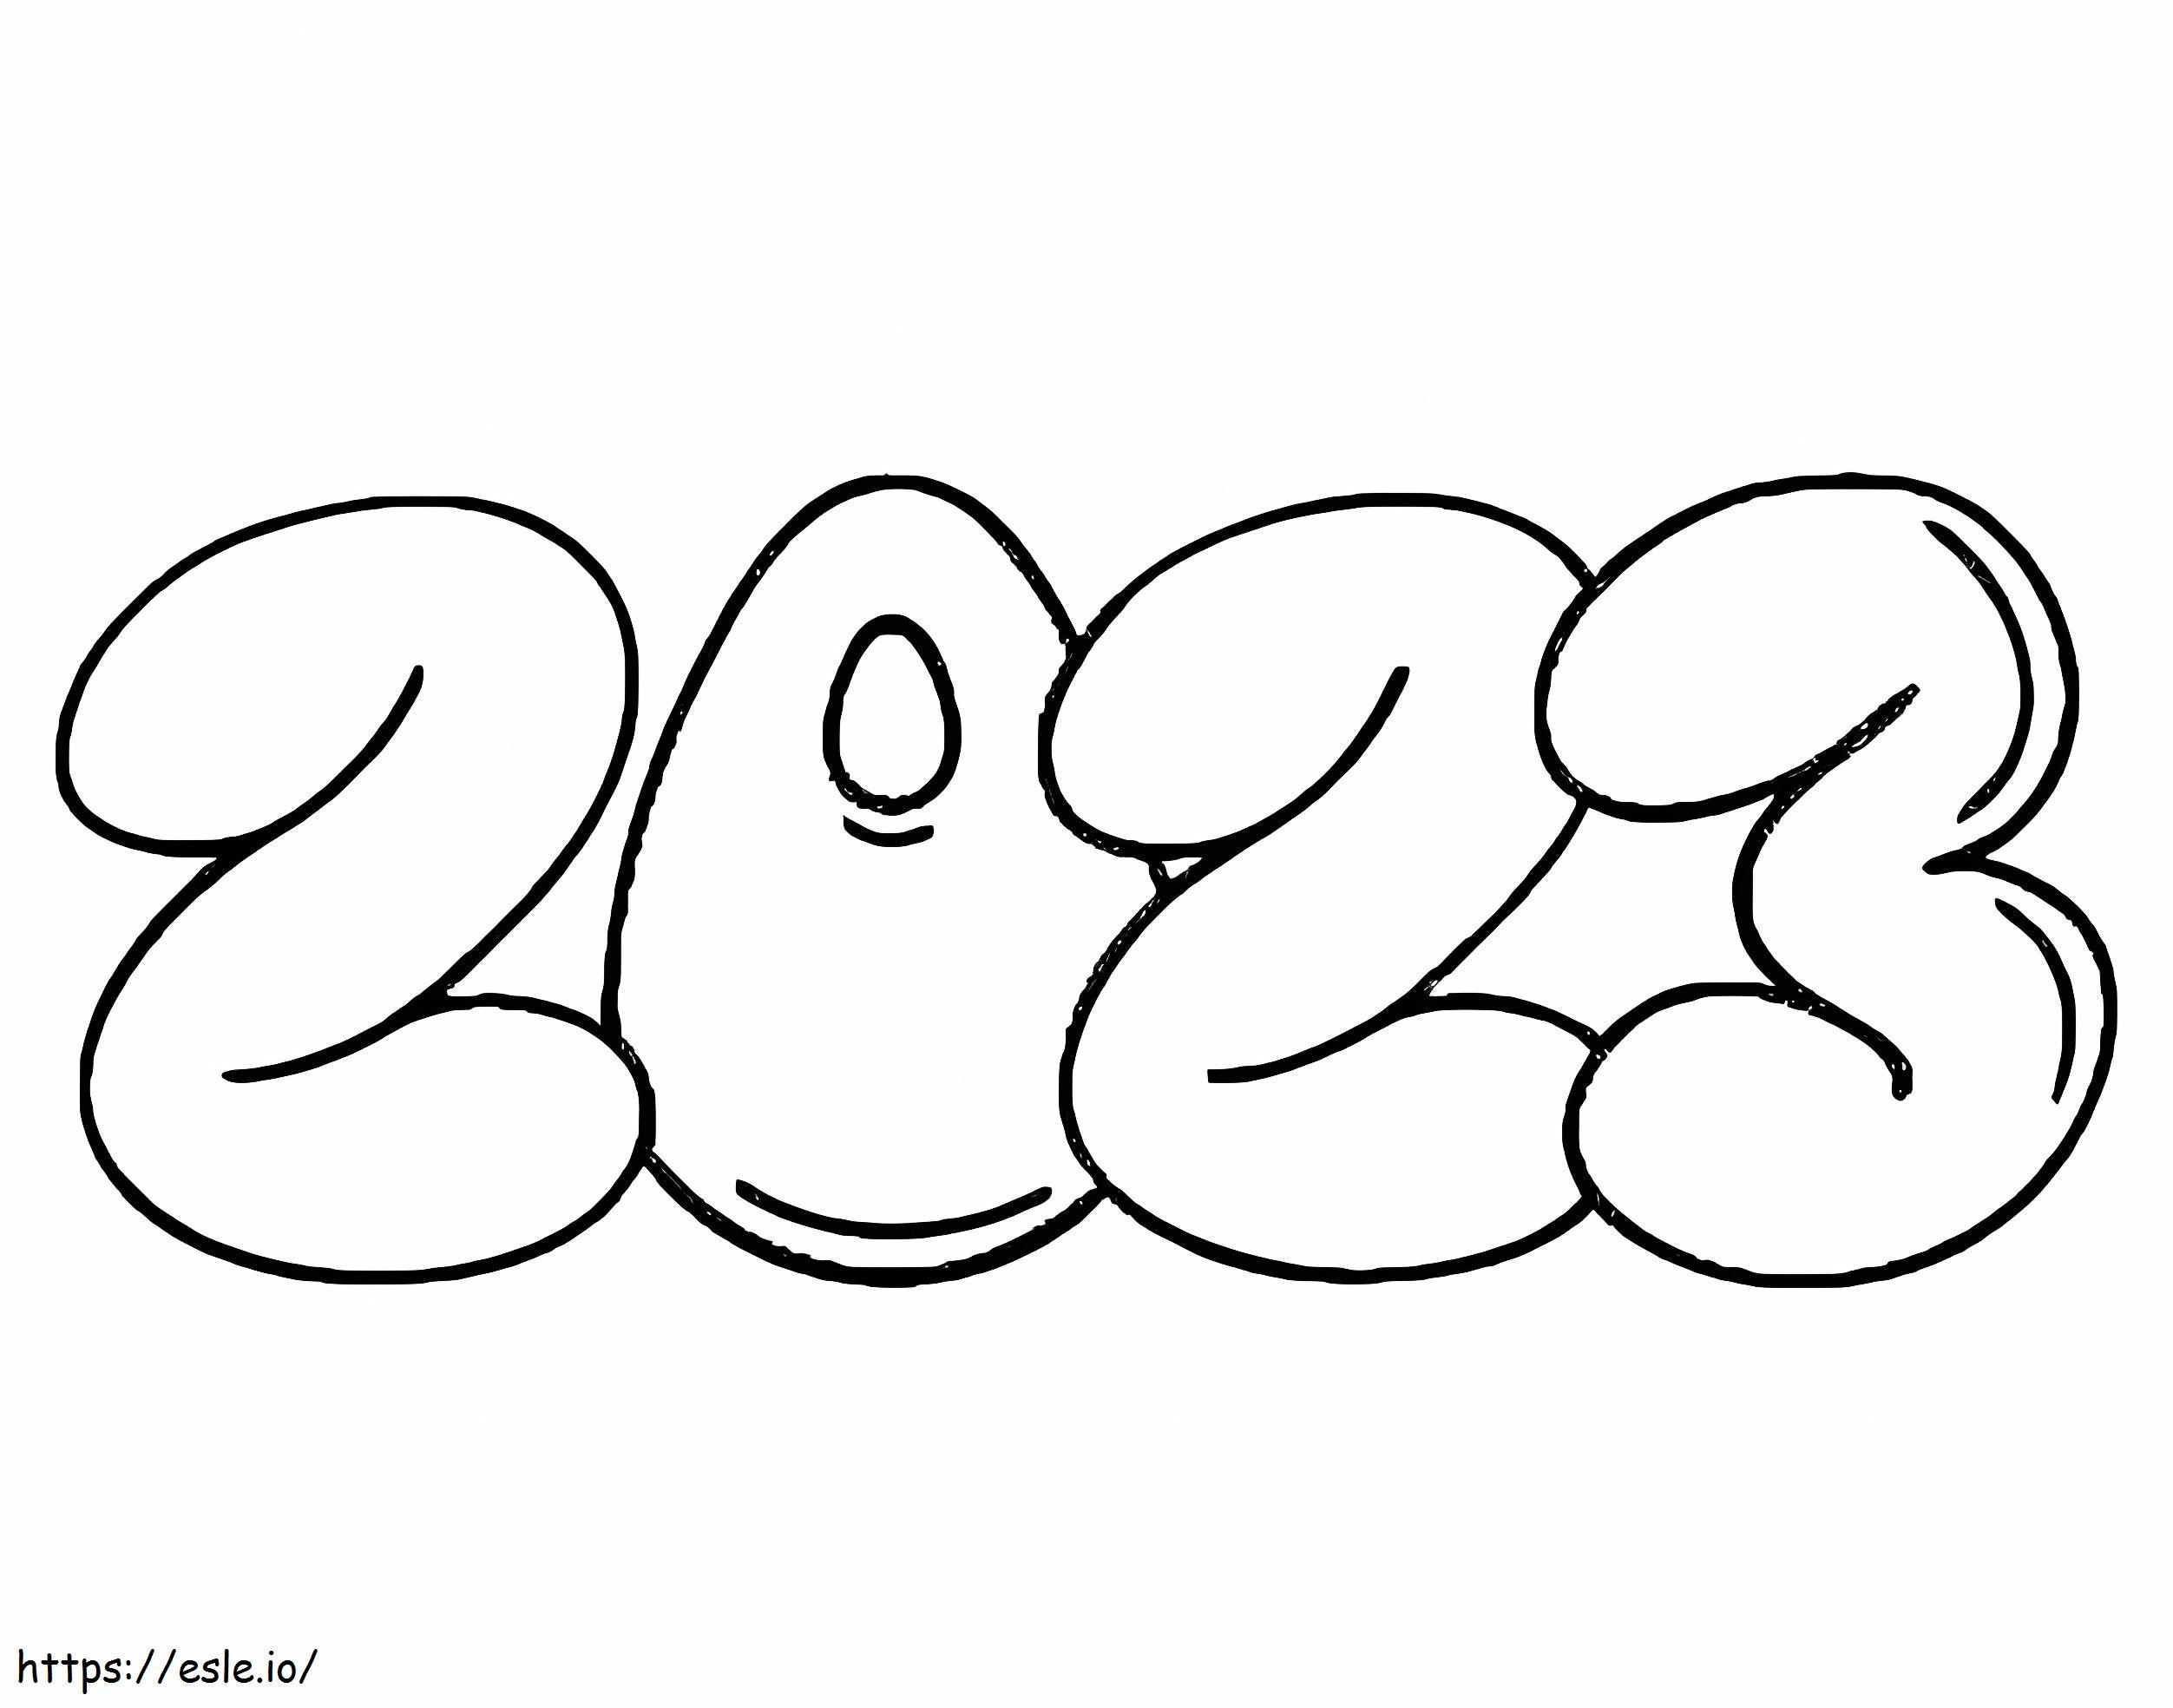 Year 2023 coloring page